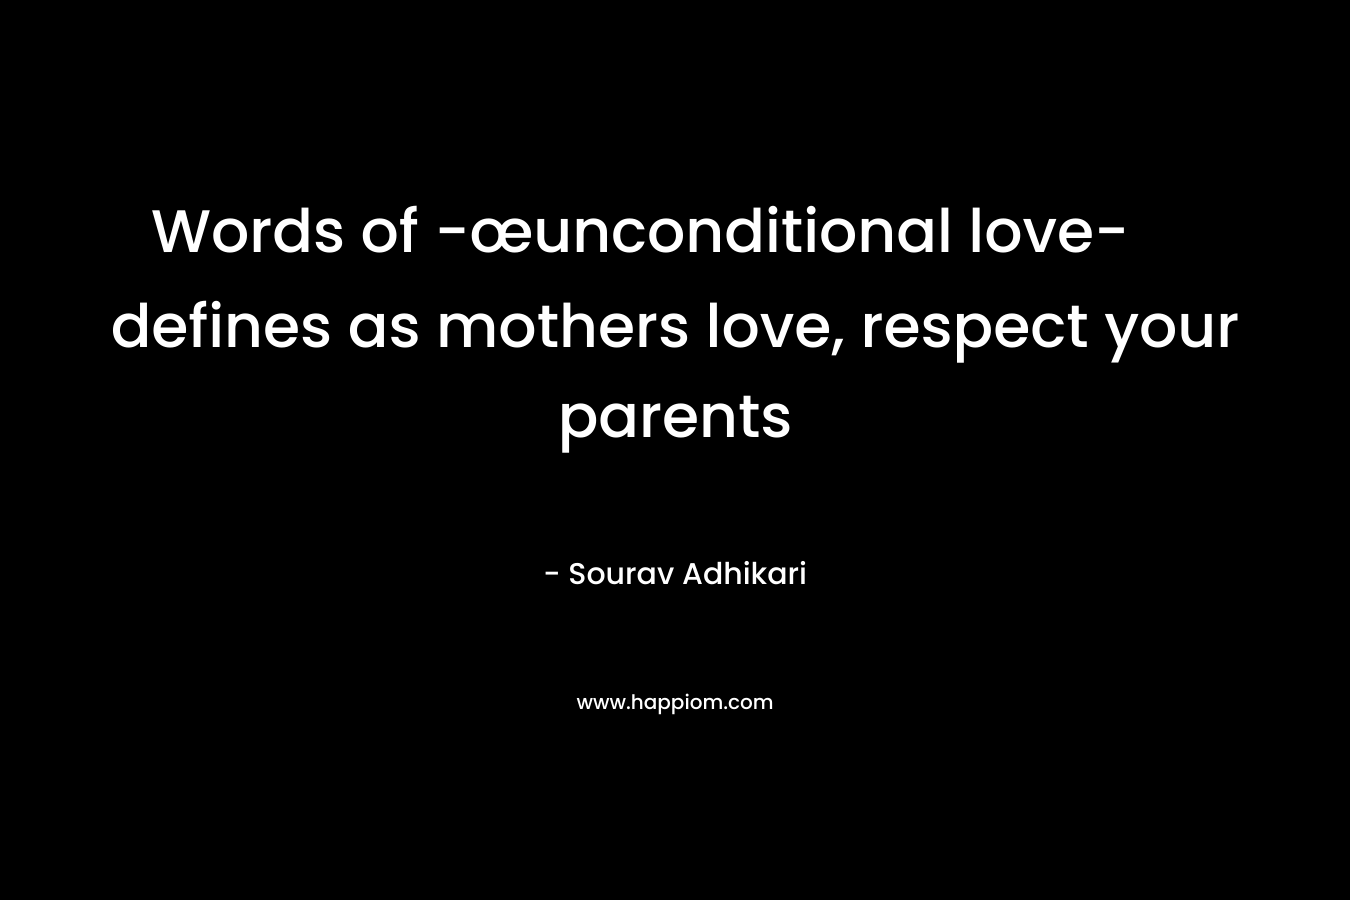 Words of -œunconditional love- defines as mothers love, respect your parents – Sourav Adhikari